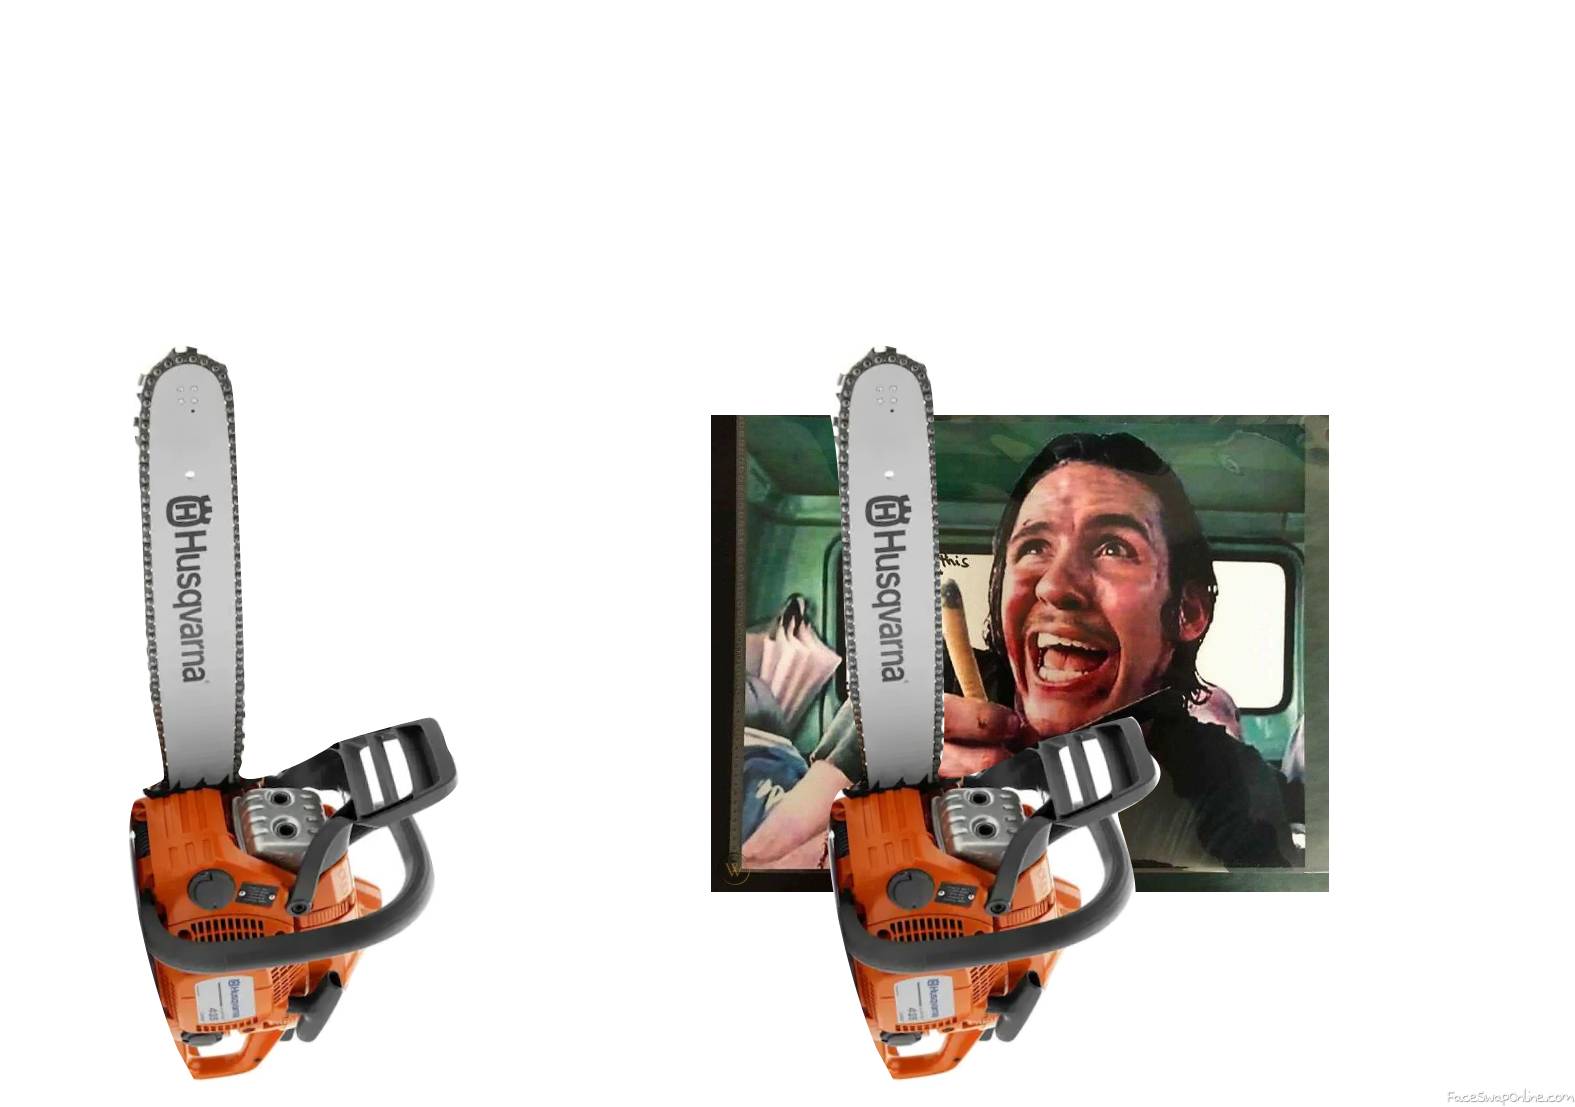 I have this chainsaw